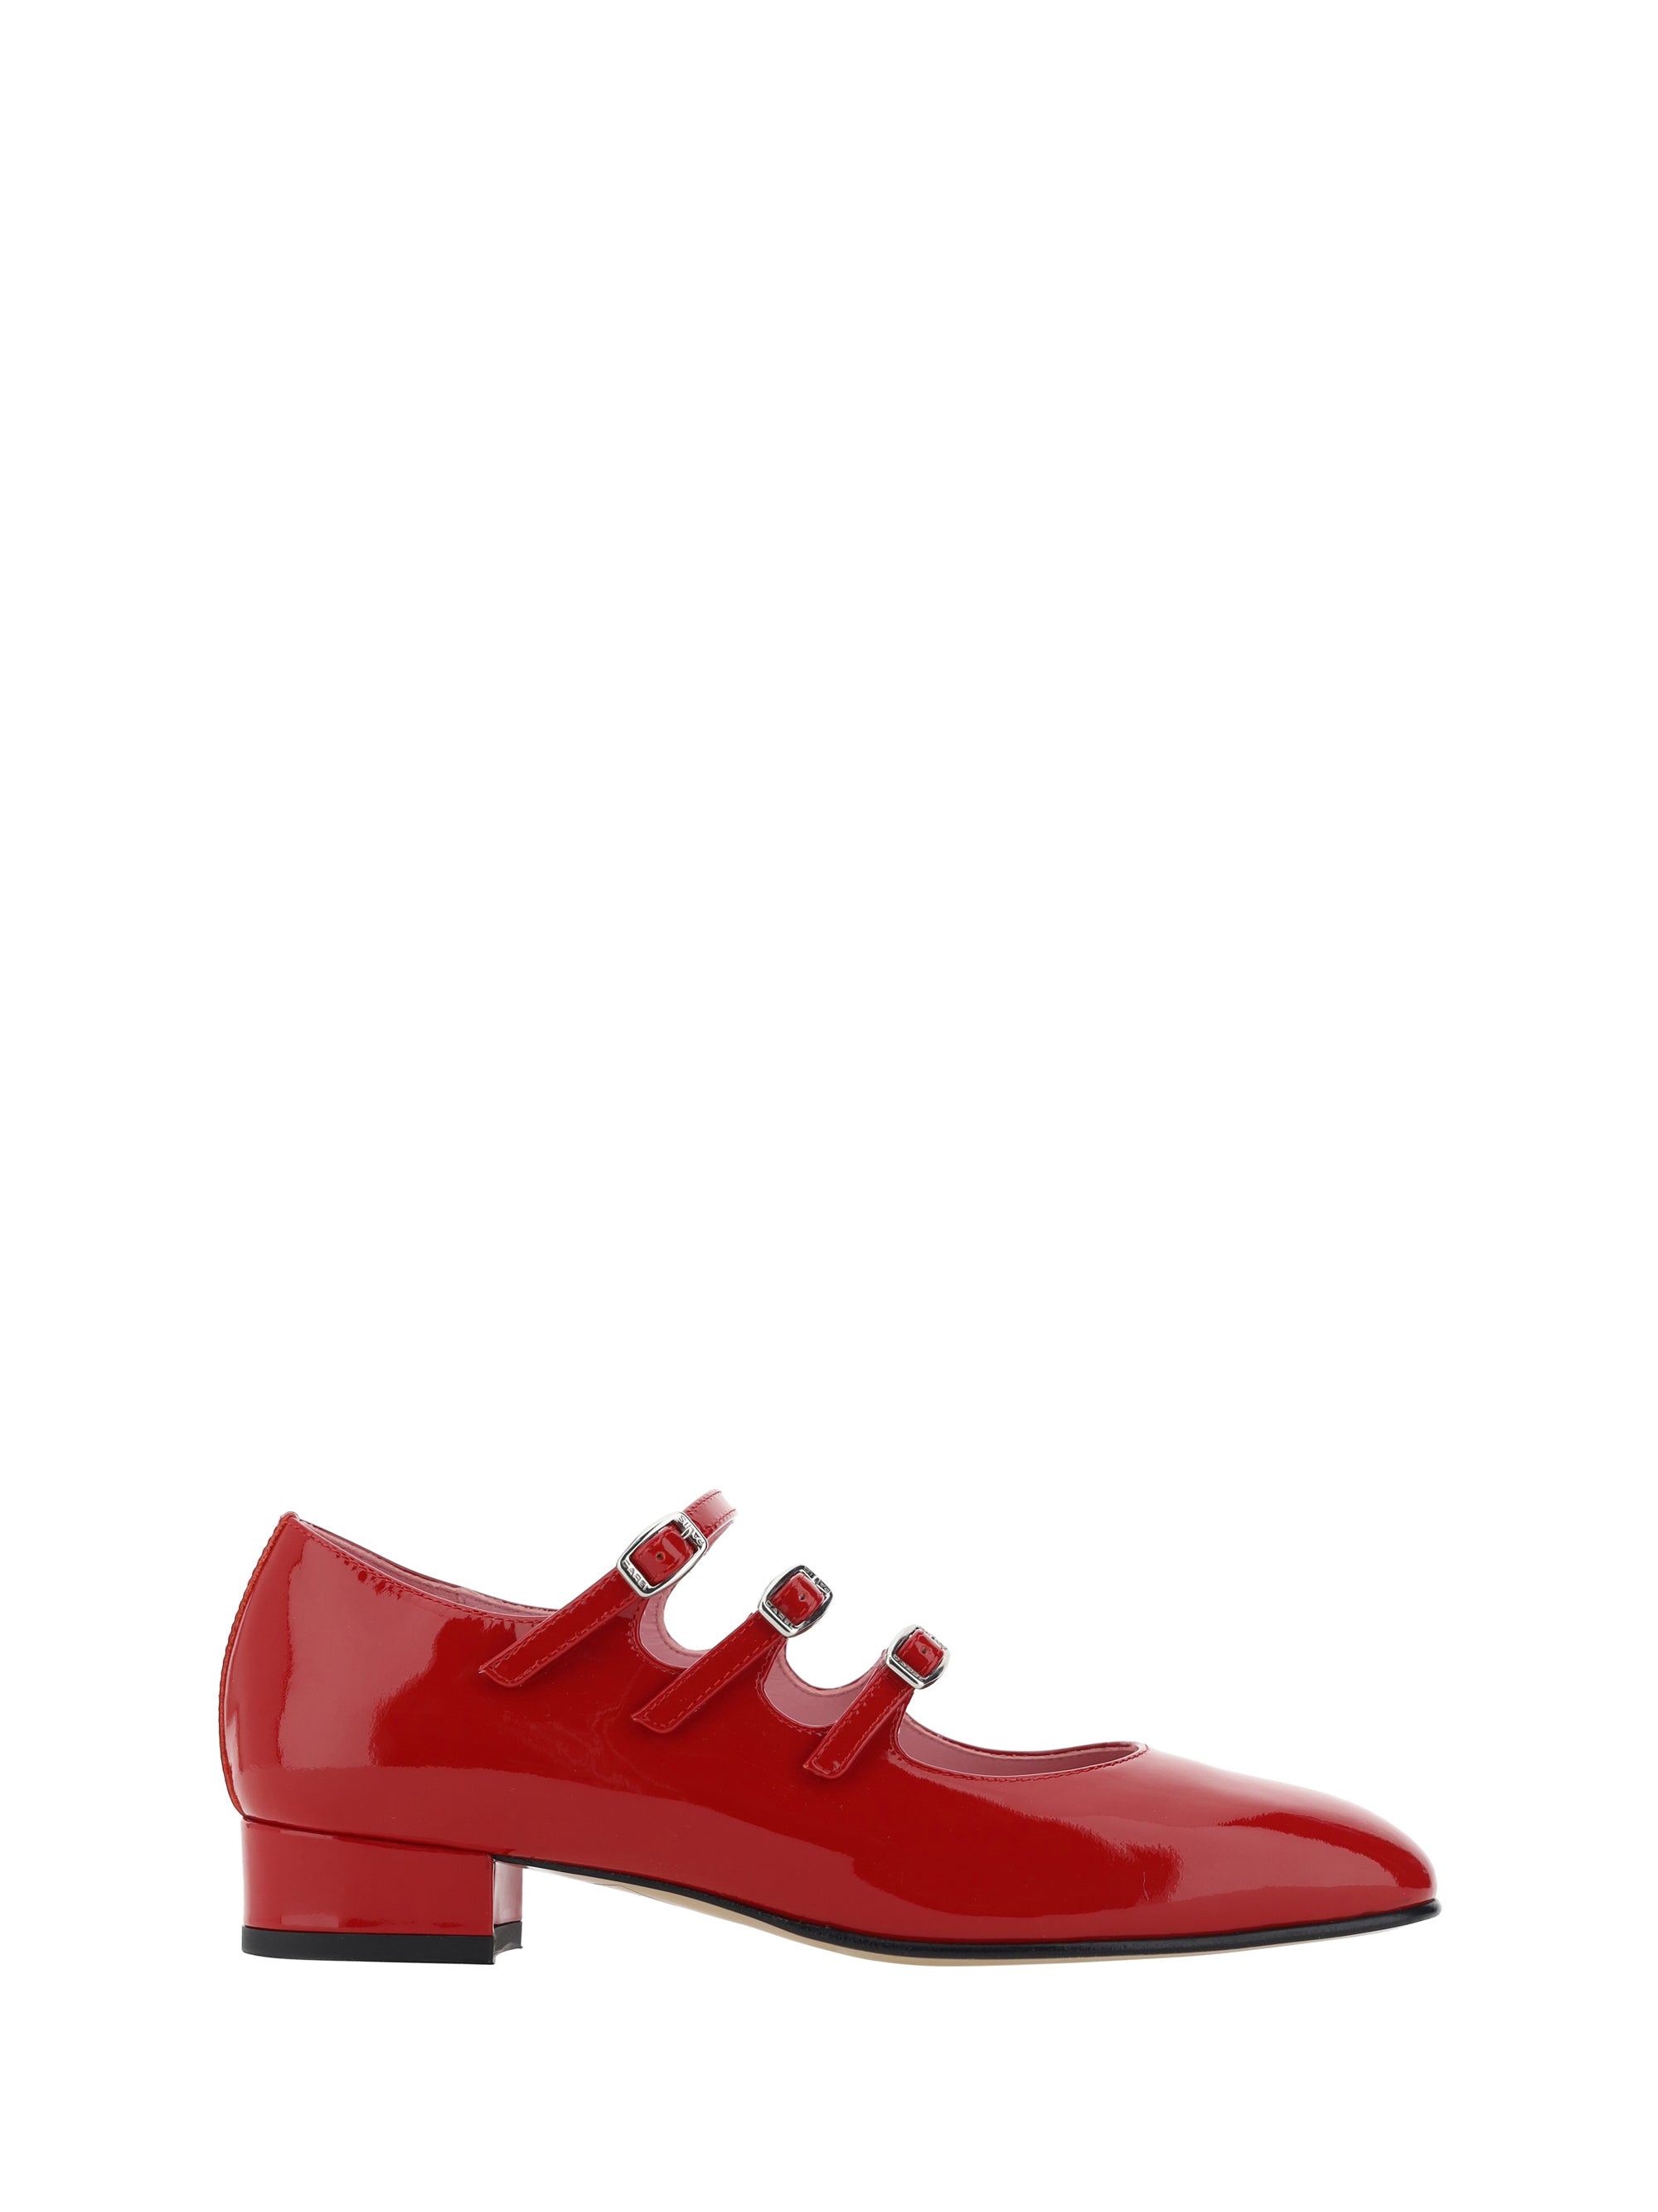 Shop Carel Paris Ariana Shoes In Ariana Red